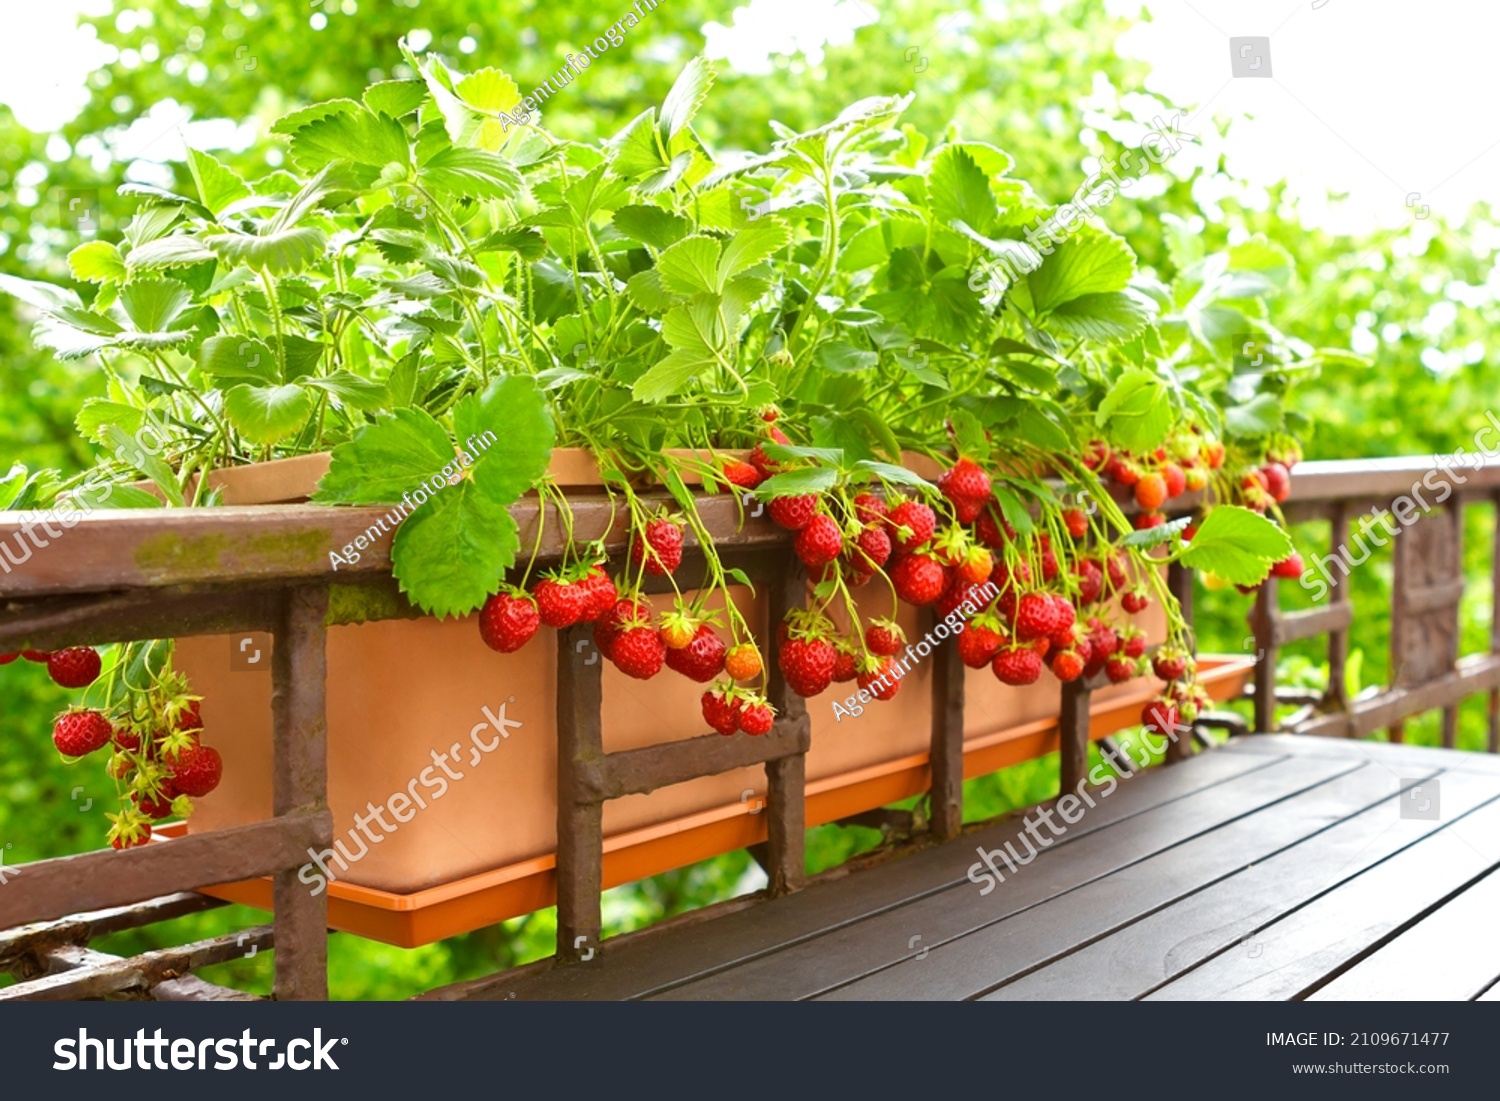 Strawberry plants with lots of ripe red strawberries in a balcony railing planter, apartment or urban gardening concept. #2109671477